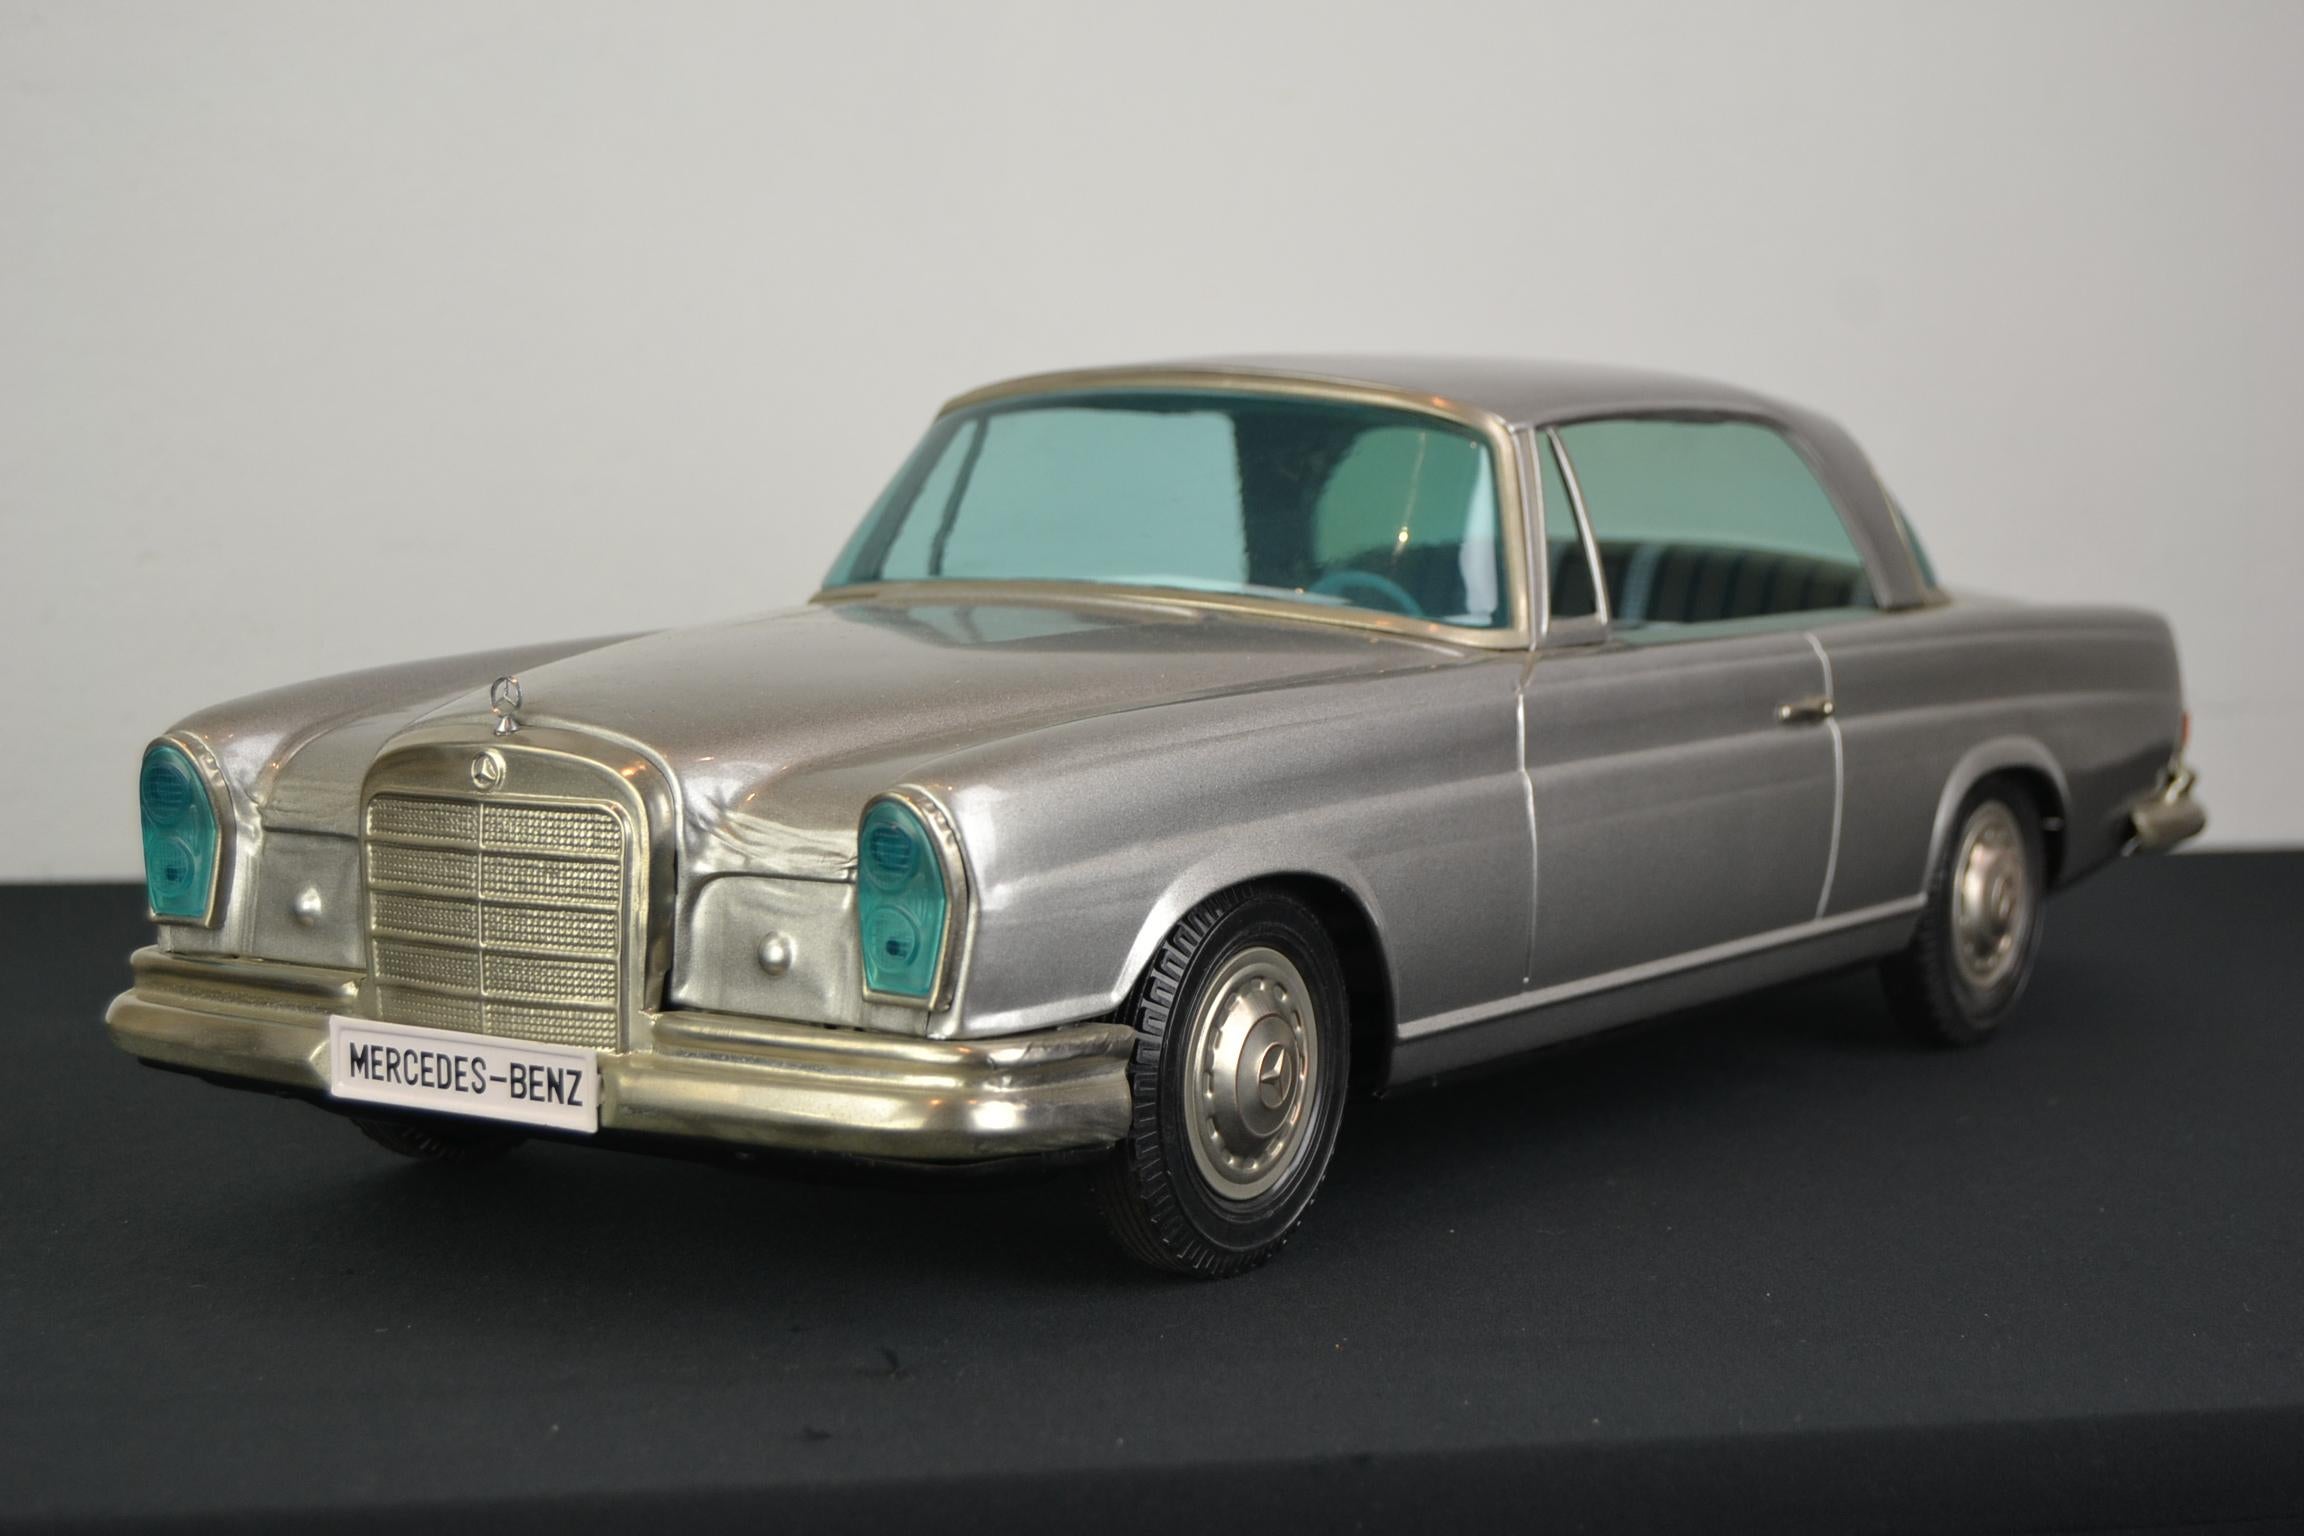 Boxed Mercedes Benz 300 SE Toy Model by Ichiko Japan, 1980s 12